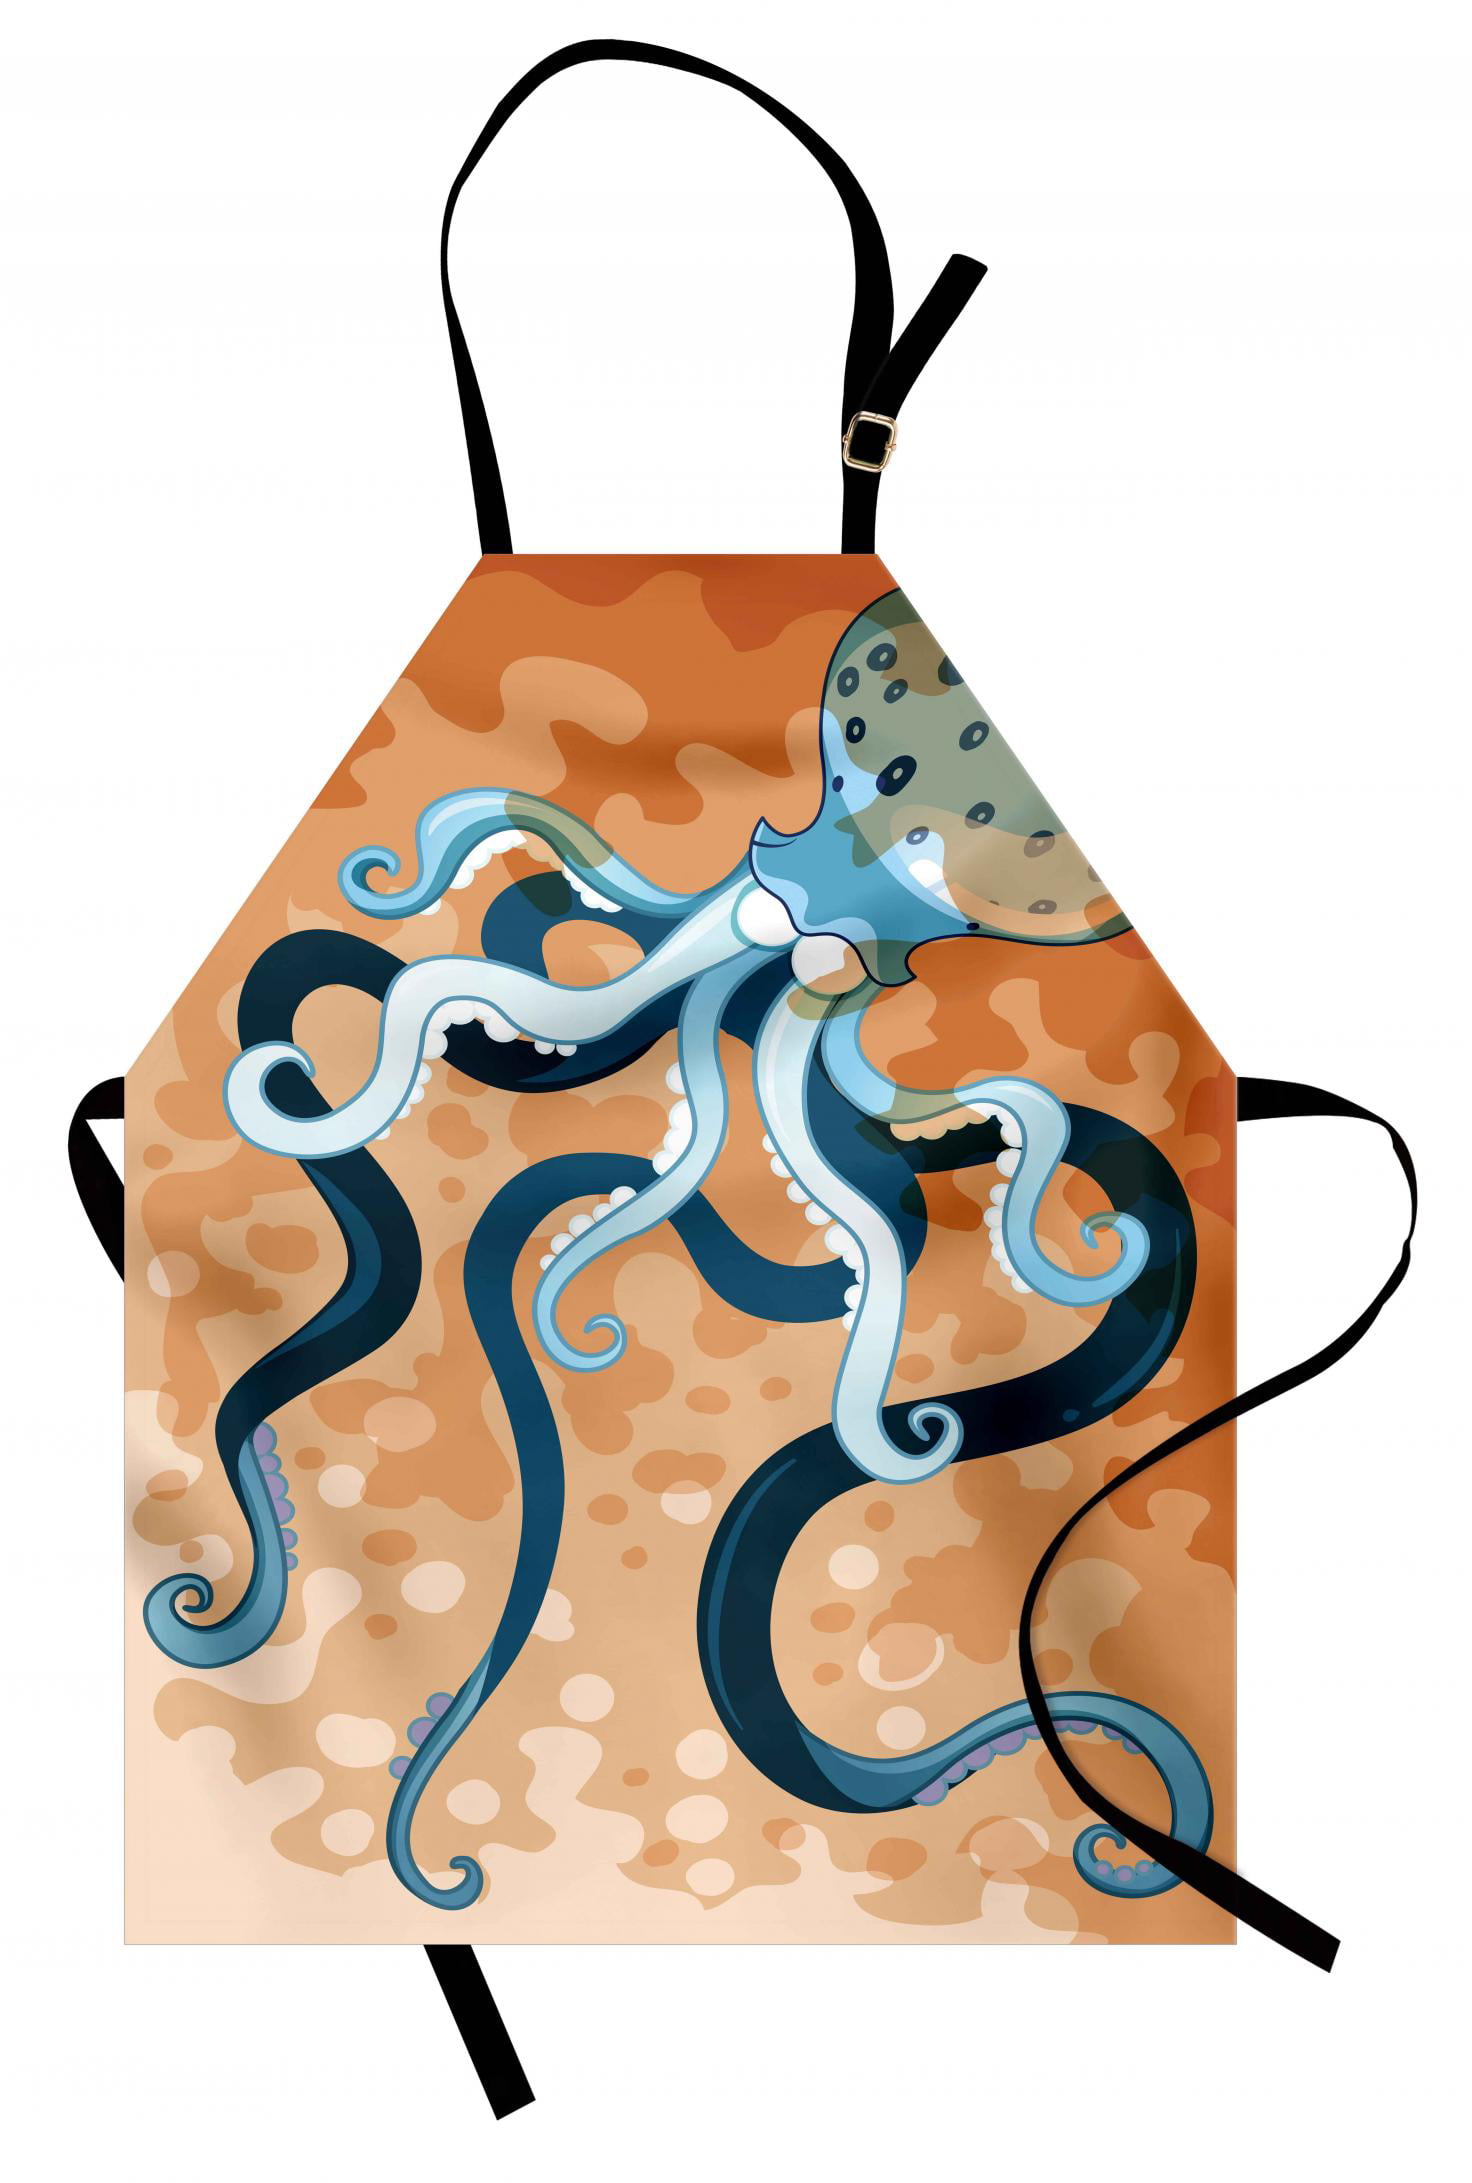 Octopus Apron Giant Octopus With Long Legs Exotic Oceanic Animals Beast Wild Life Image Print Unisex Kitchen Bib Apron With Adjustable Neck For Cooking Baking Gardening Orange Blue By Ambesonne Walmart Com,How To Cook Carrots Healthy